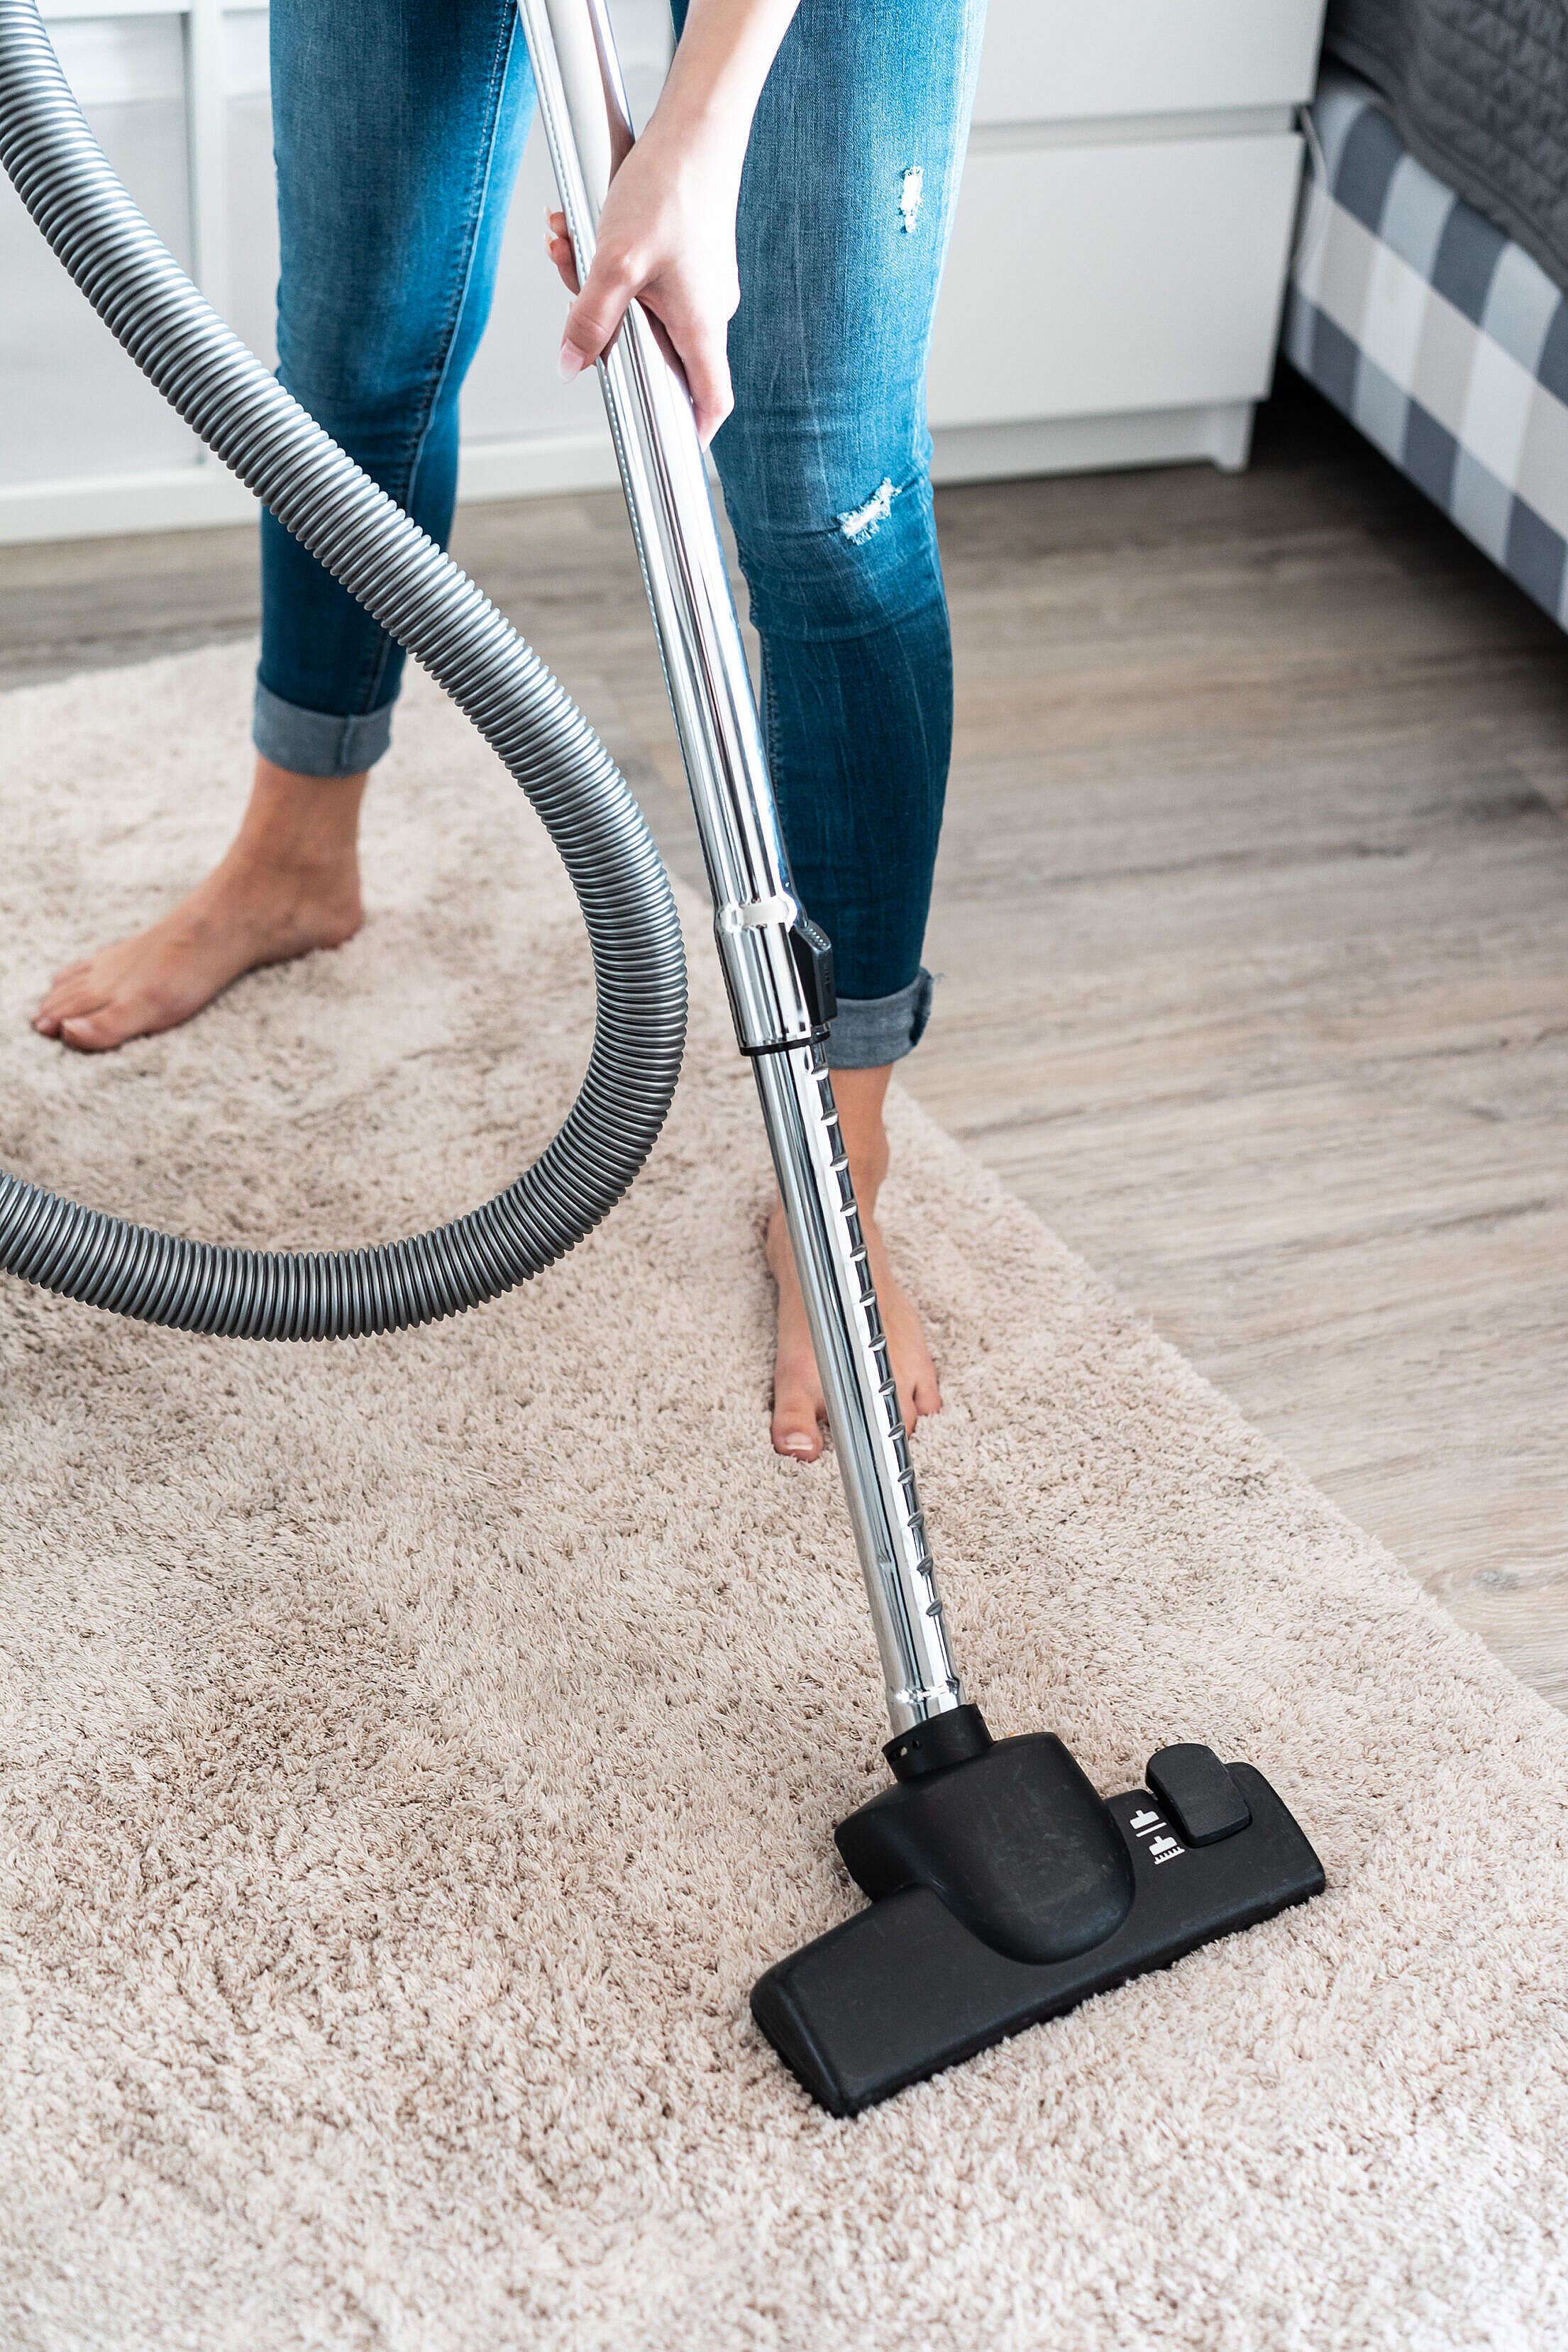 woman-cleaning-vacuuming-the-carpet-at-home-free-photo-2210x3315.jpg (1.02 MB)